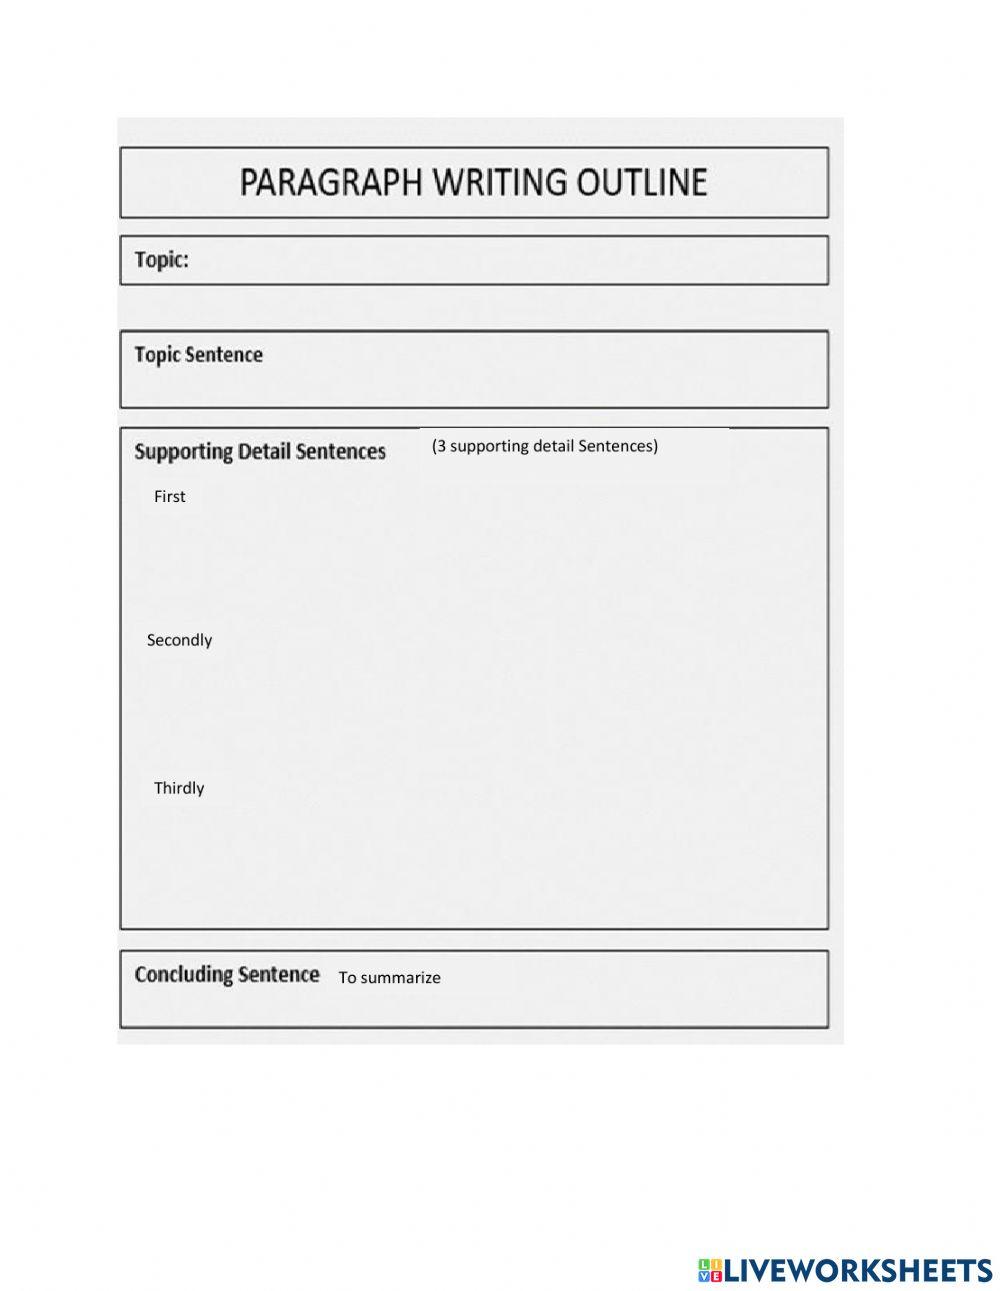 Paragraph Writing Outline